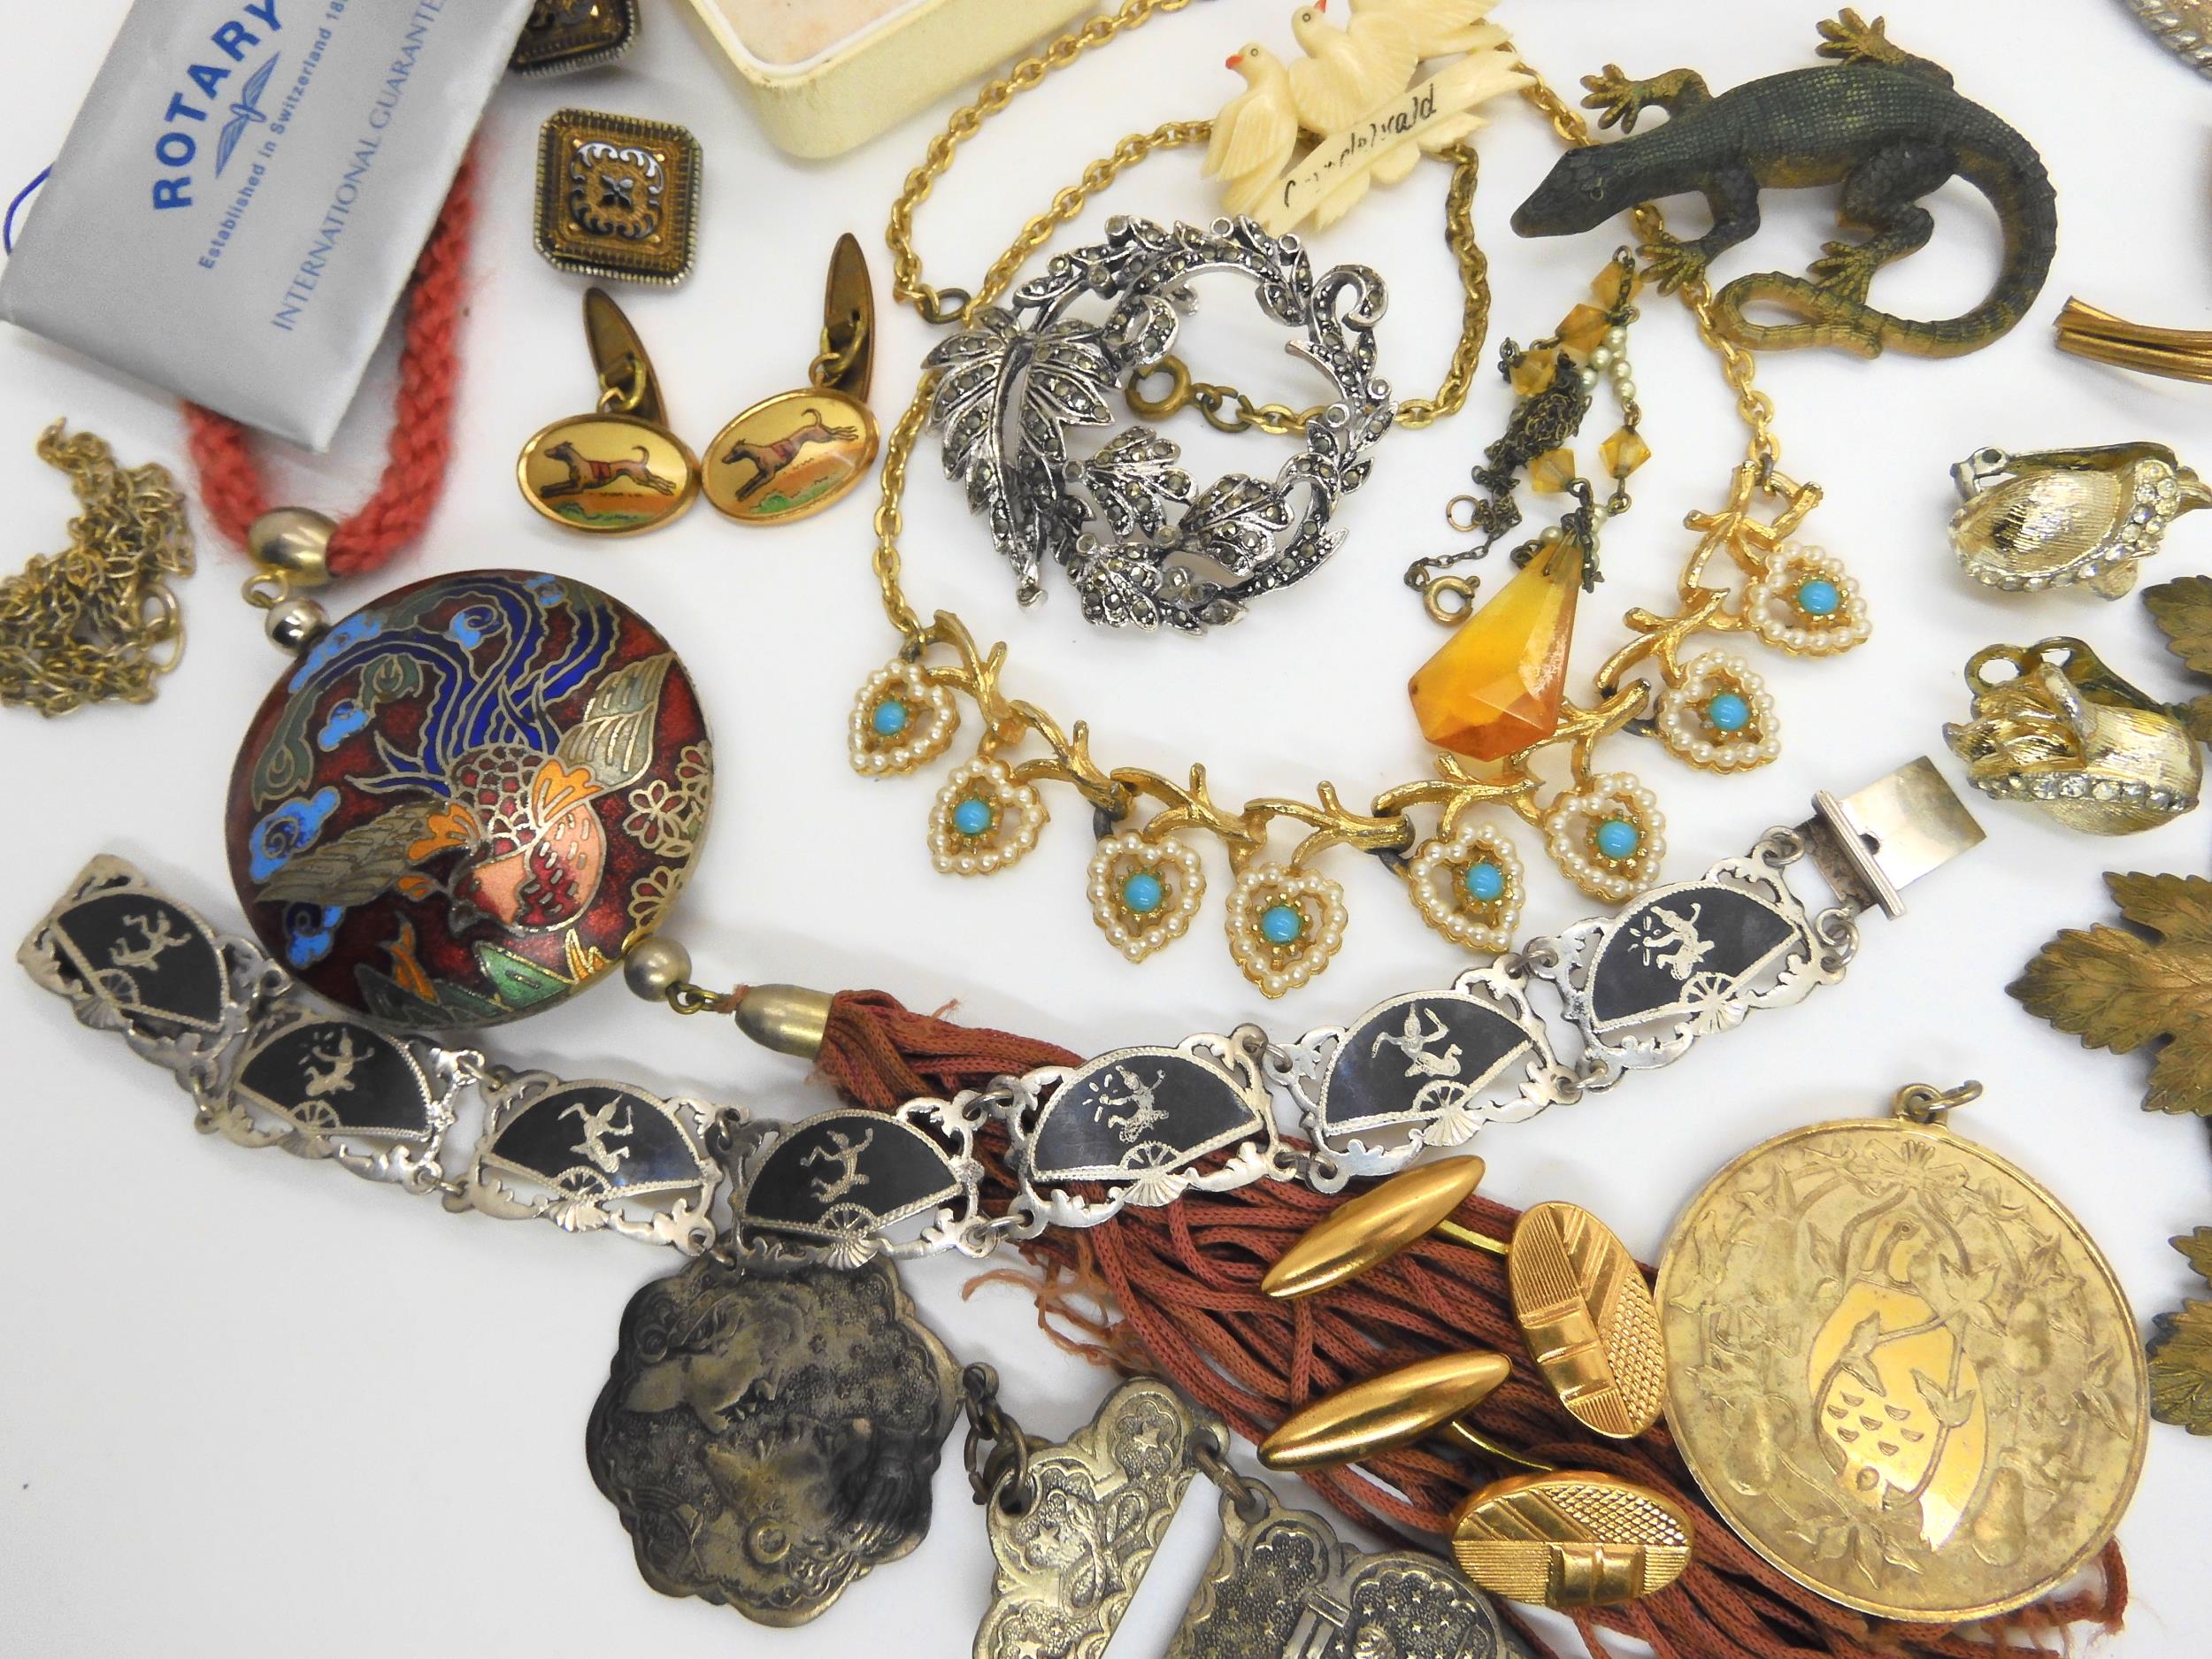 A silver gilt 'Partridge in a pear tree' pendant, a Siam wear peacock brooch and other items - Image 5 of 5